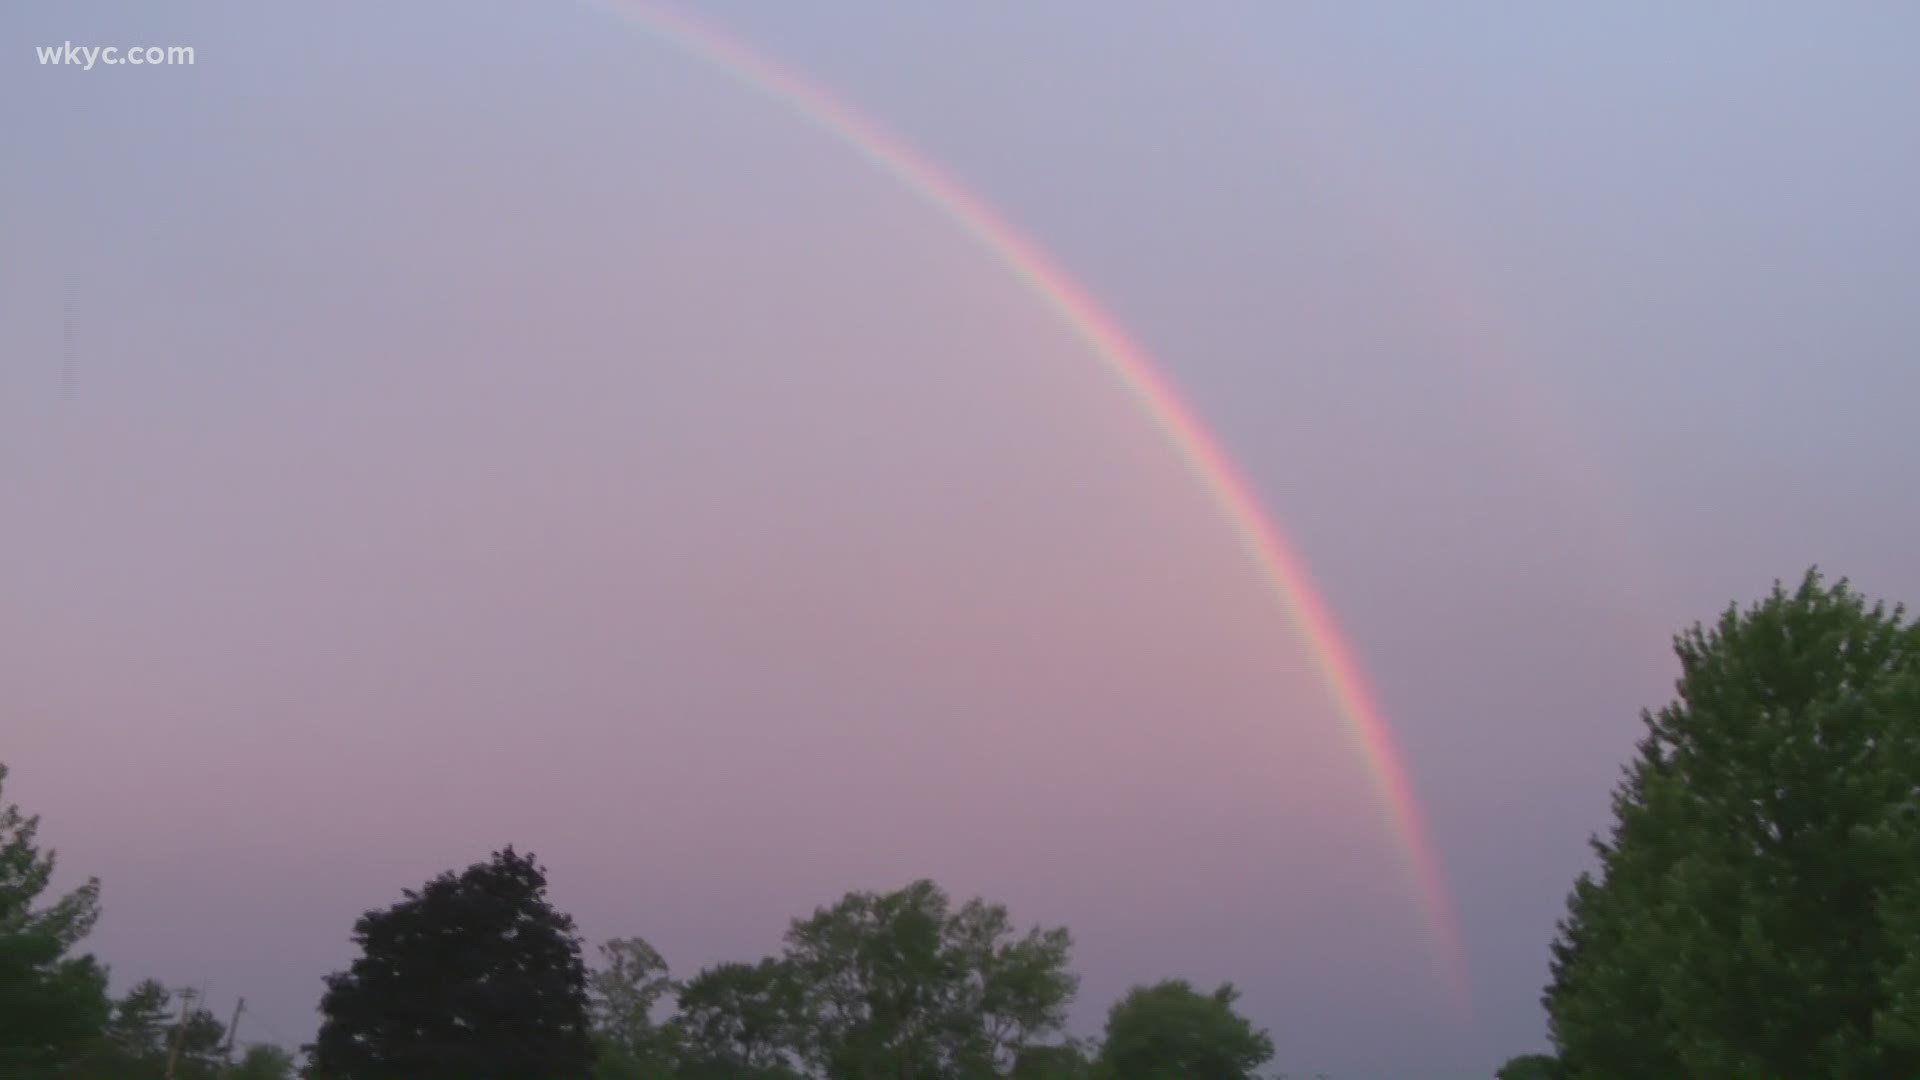 June 23, 2020: Residents in Medina woke up to a rainbow stretched across the sky this morning. Such a beautiful way to get the day going.